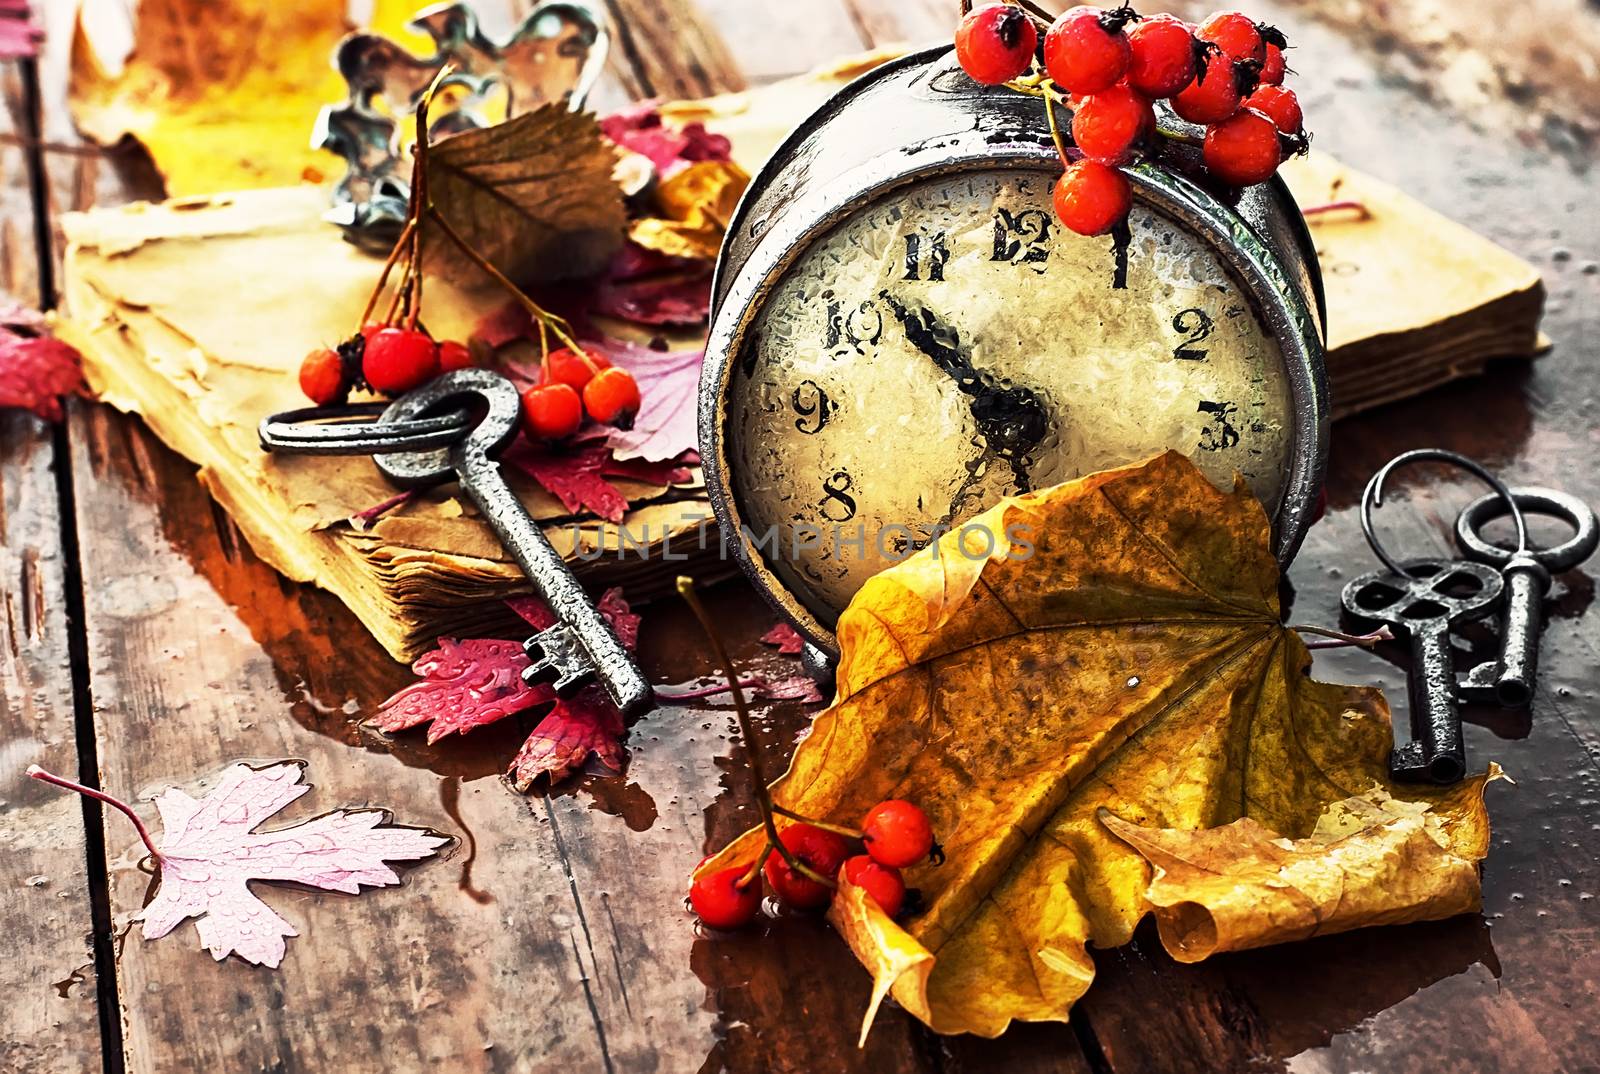 Od clock book and the keys on the wet table strewn with autumn leaves.Photo tinted.